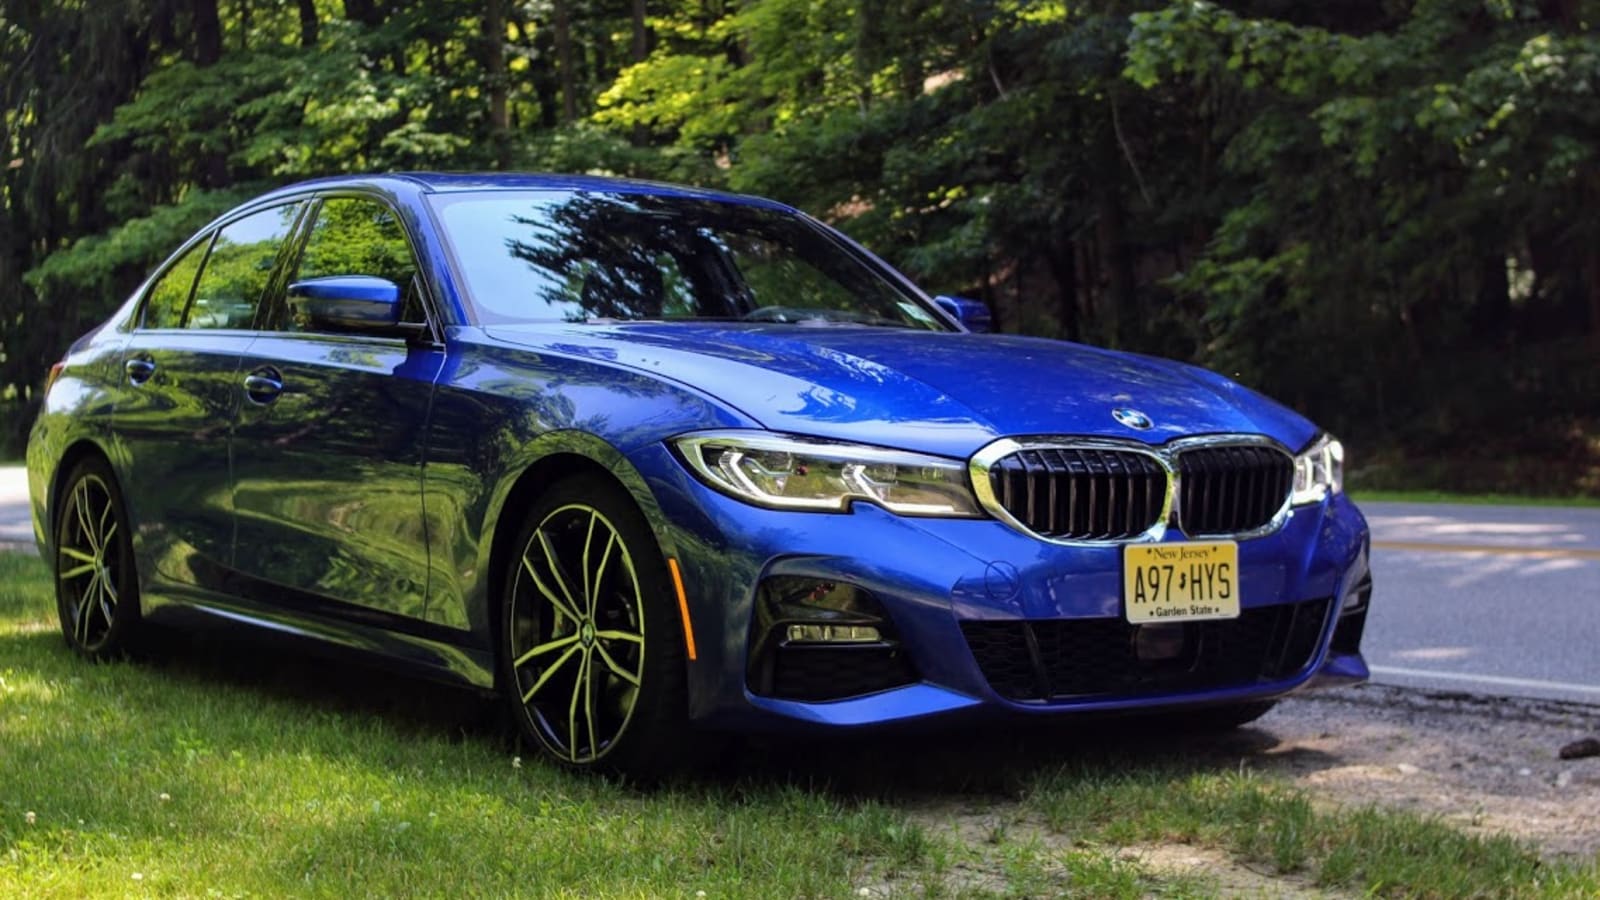 Review: 2019 BMW 330i is good enough among sports sedans, but not great